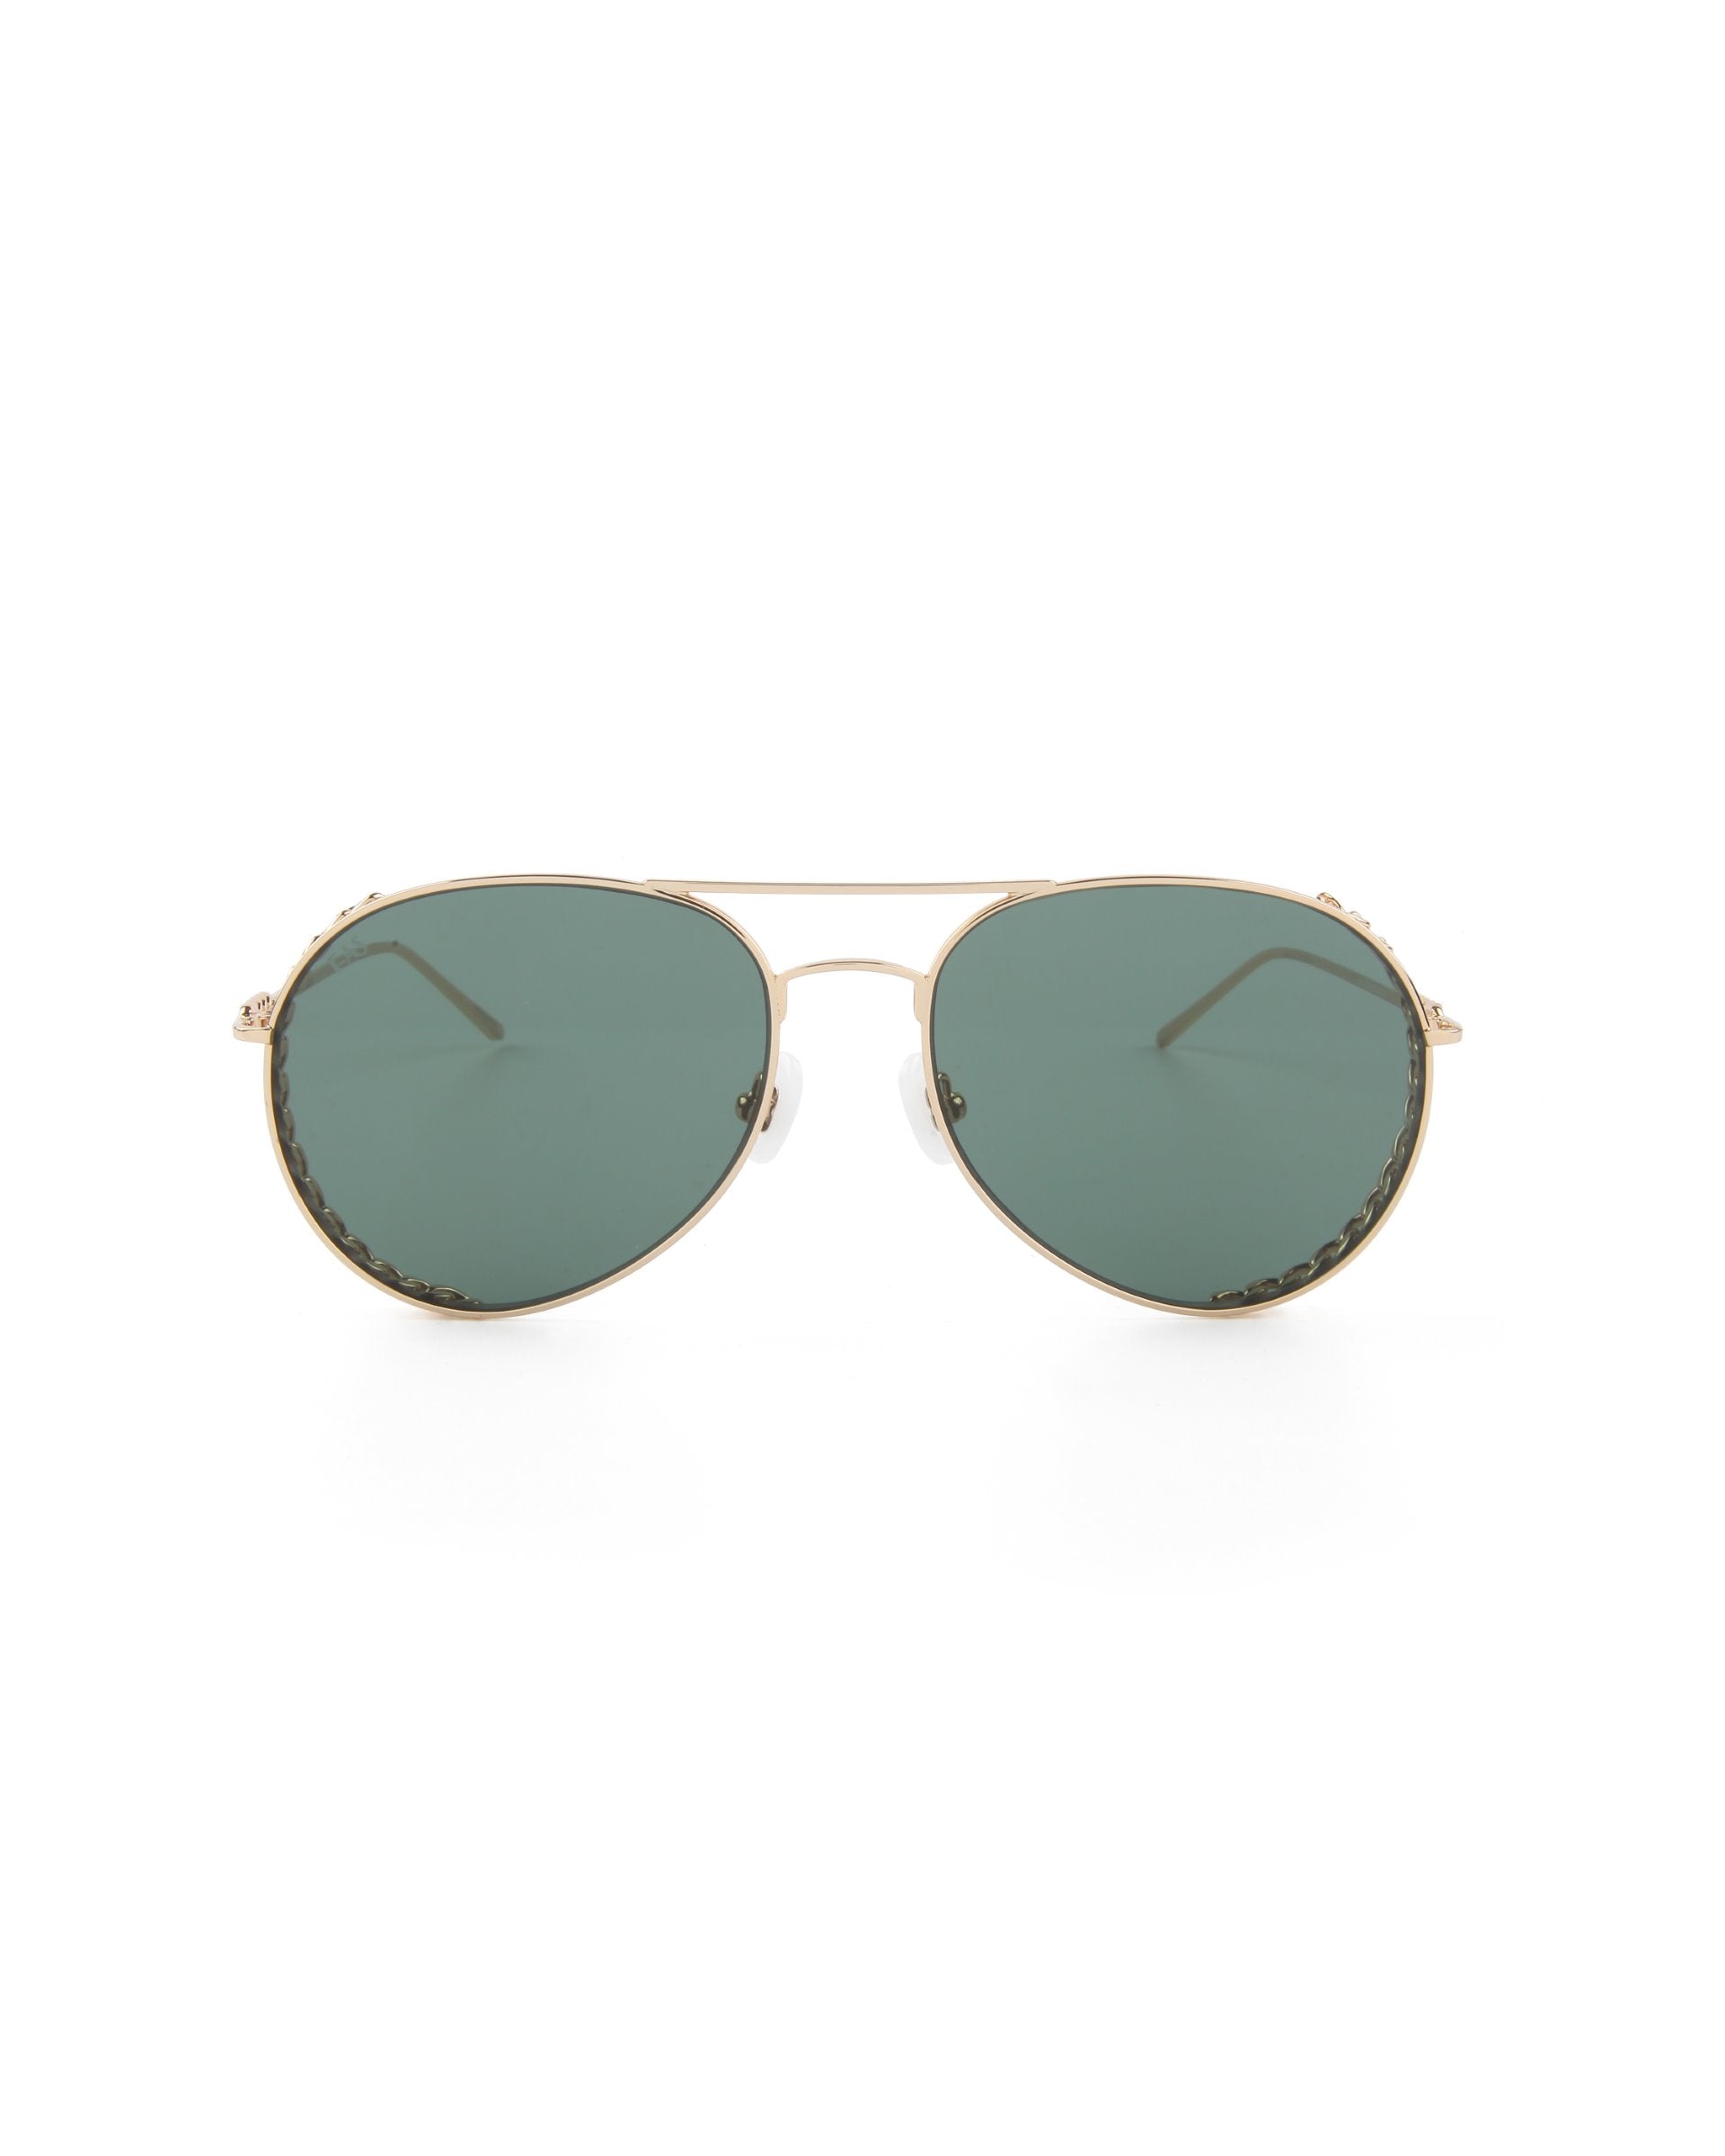 A pair of Links by For Art's Sake® with a thin gold-plated stainless steel frame and dark green Nylon lenses. The sunglasses feature a double bridge design and adjustable nose pads. The temples are gold with curved ends for a secure fit, while the large, slightly rounded lenses complete the classic look.